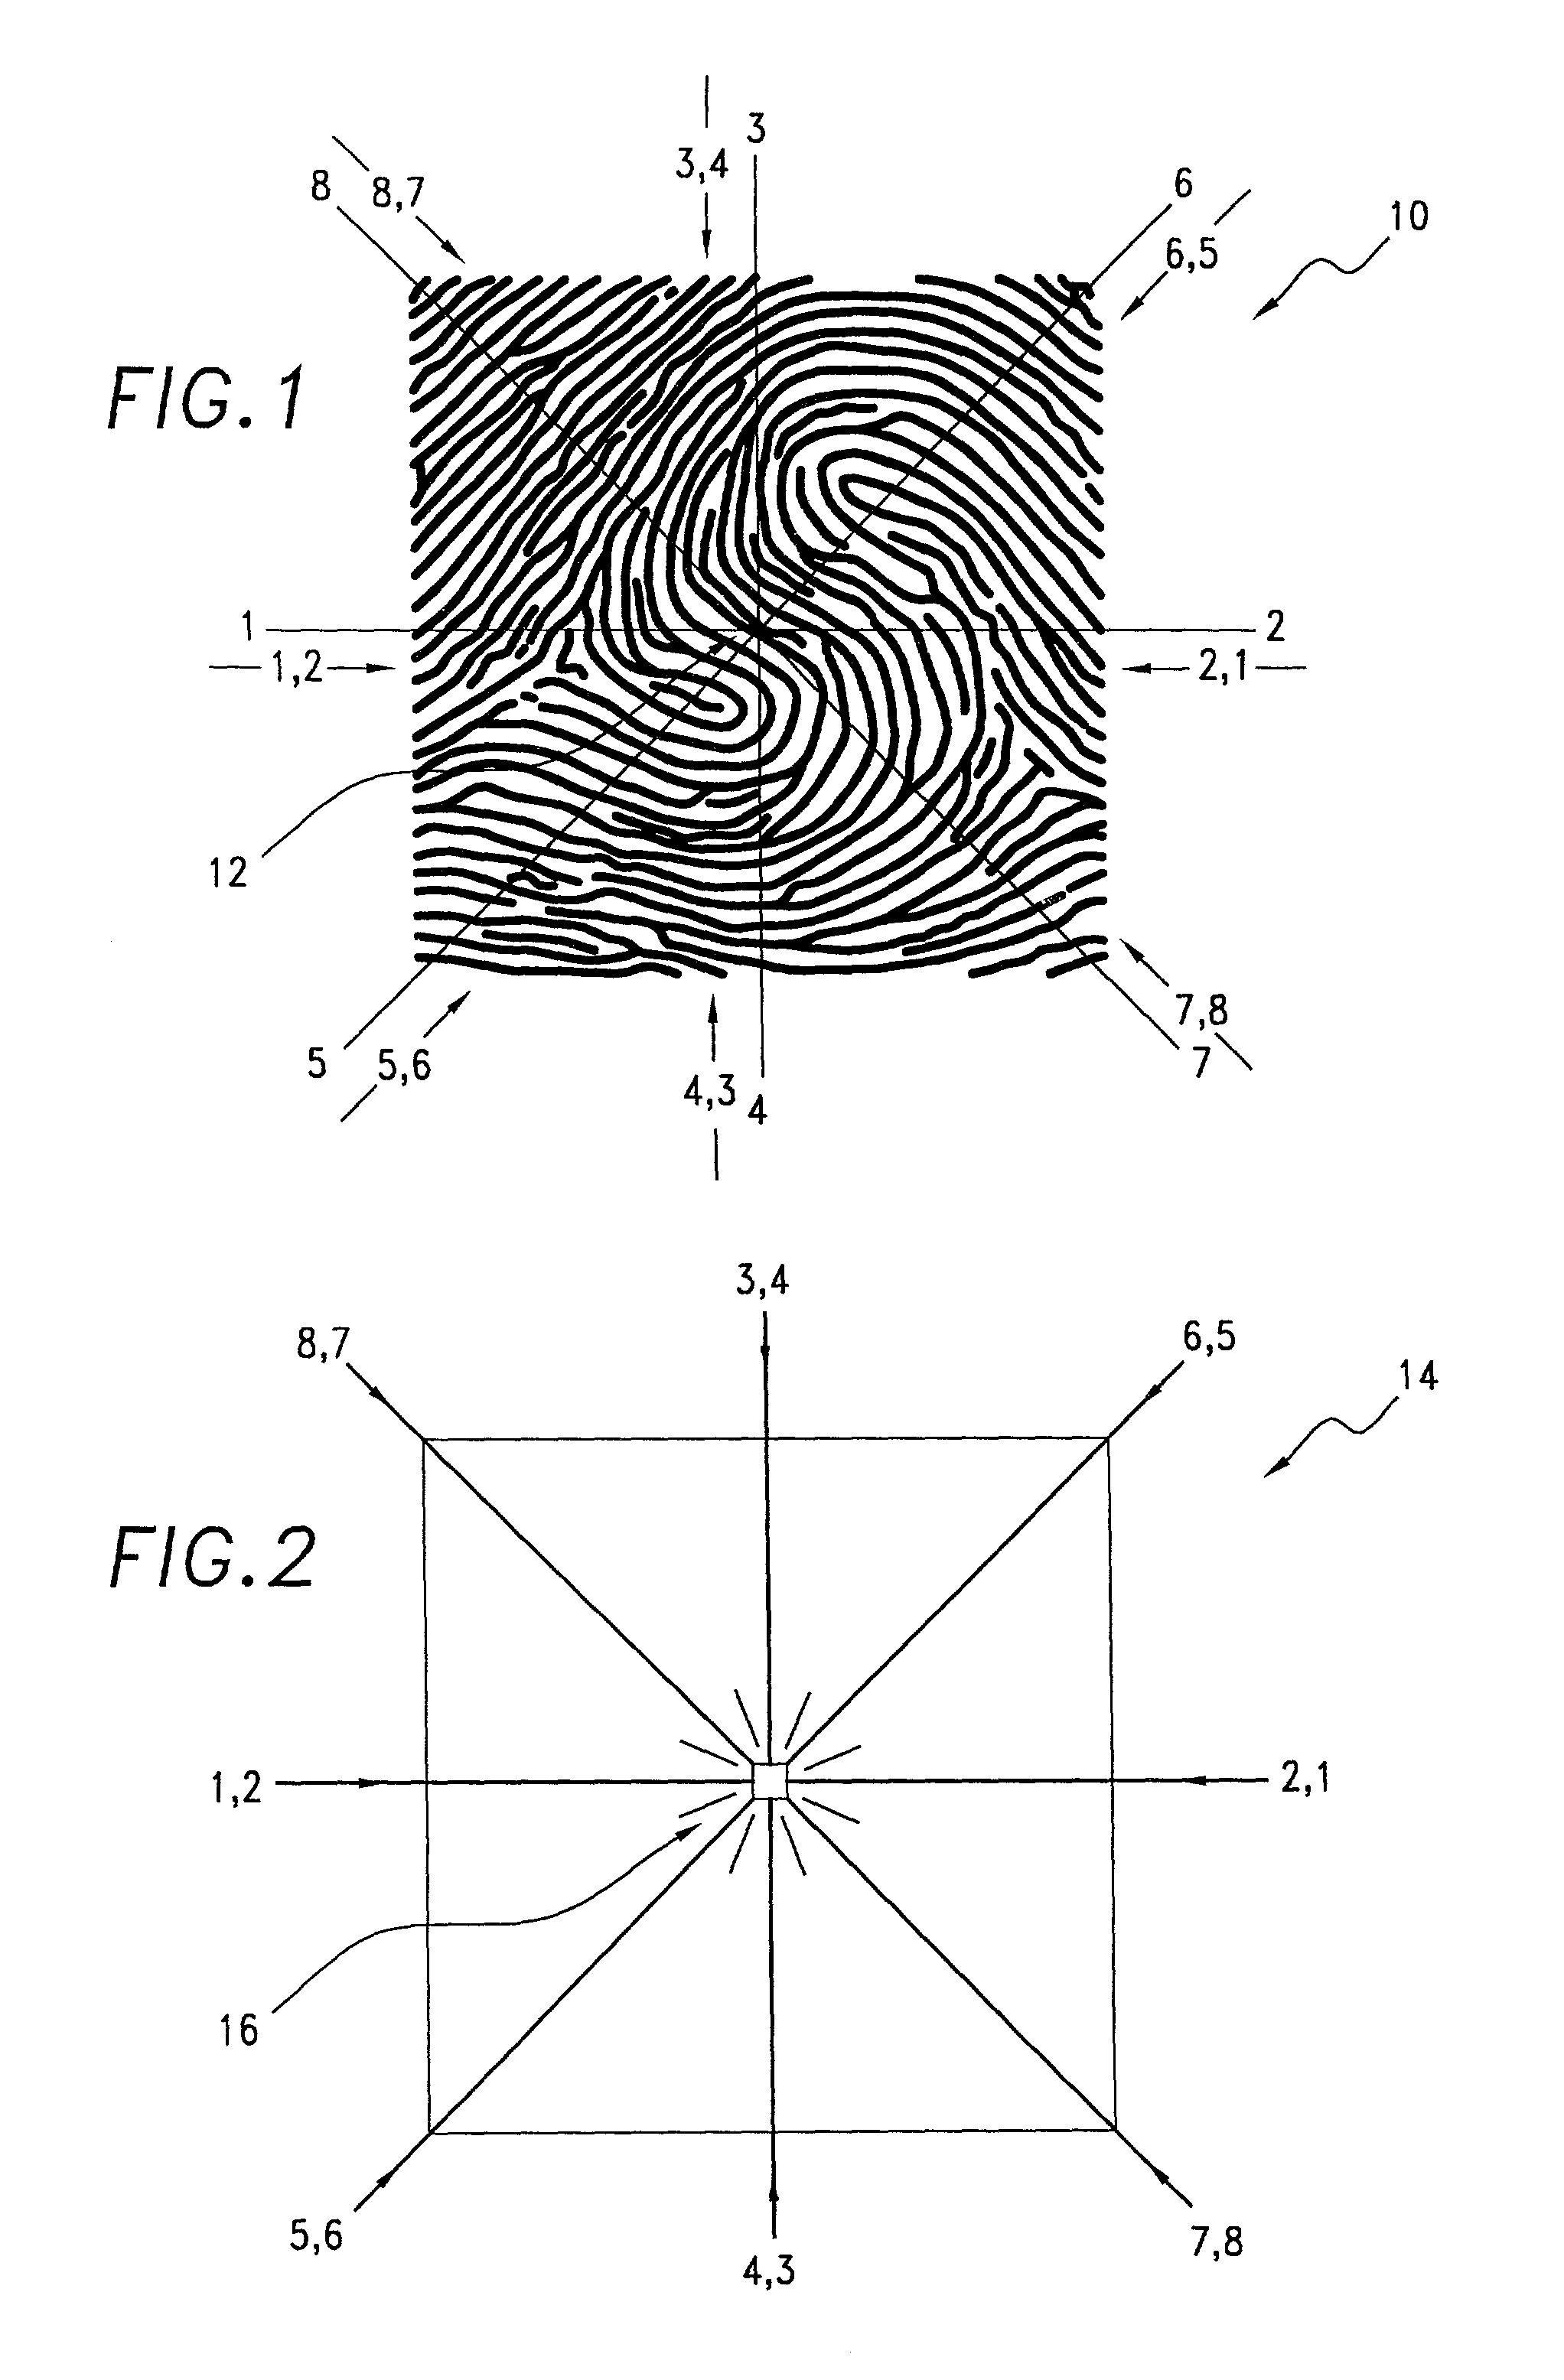 Authentication method utilizing a sequence of linear partial fingerprint signatures selected by a personal code